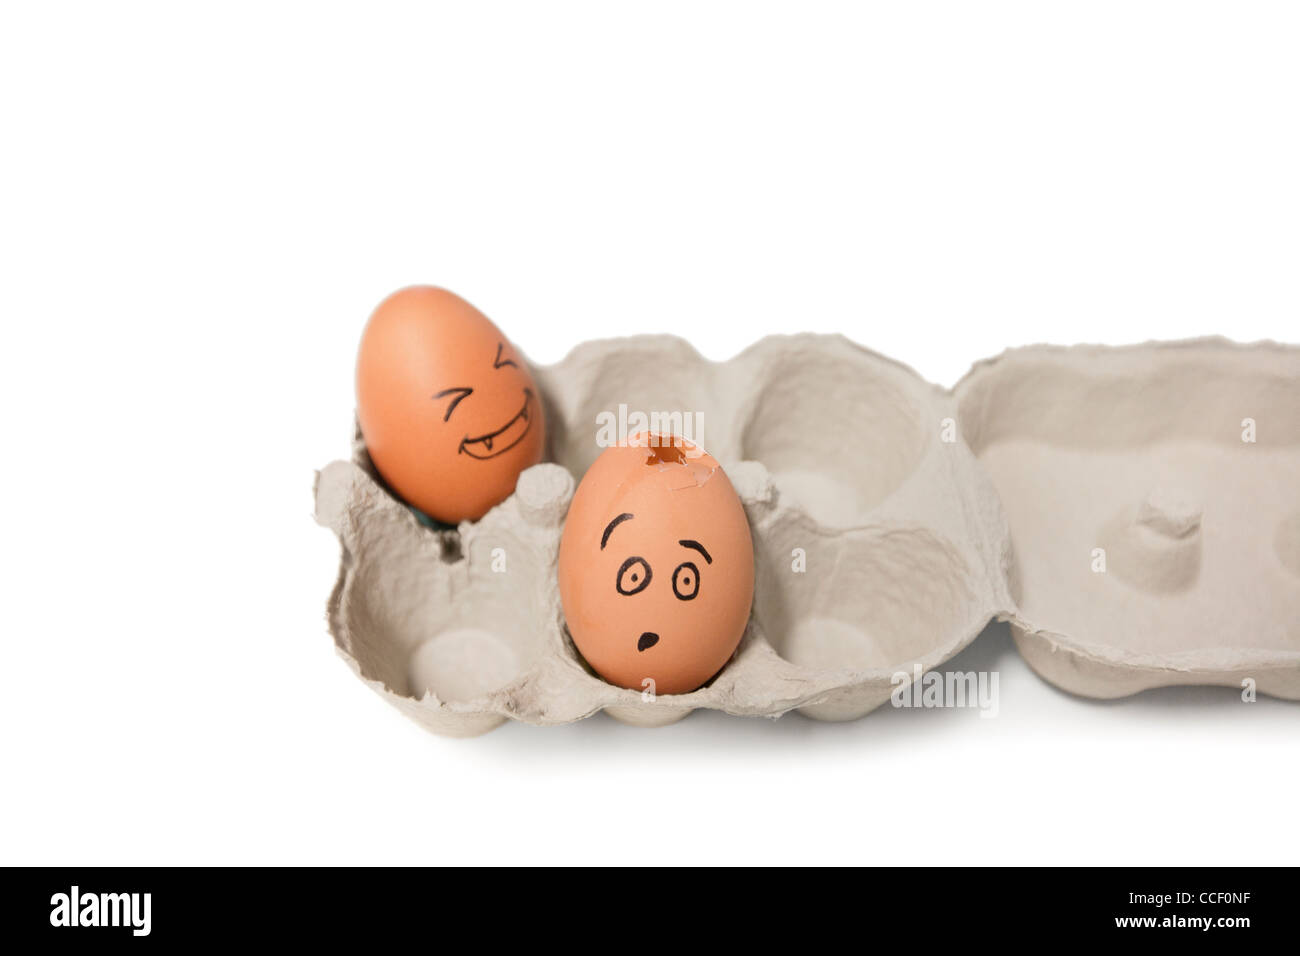 Carton of brown eggs with one cracked egg Stock Photo